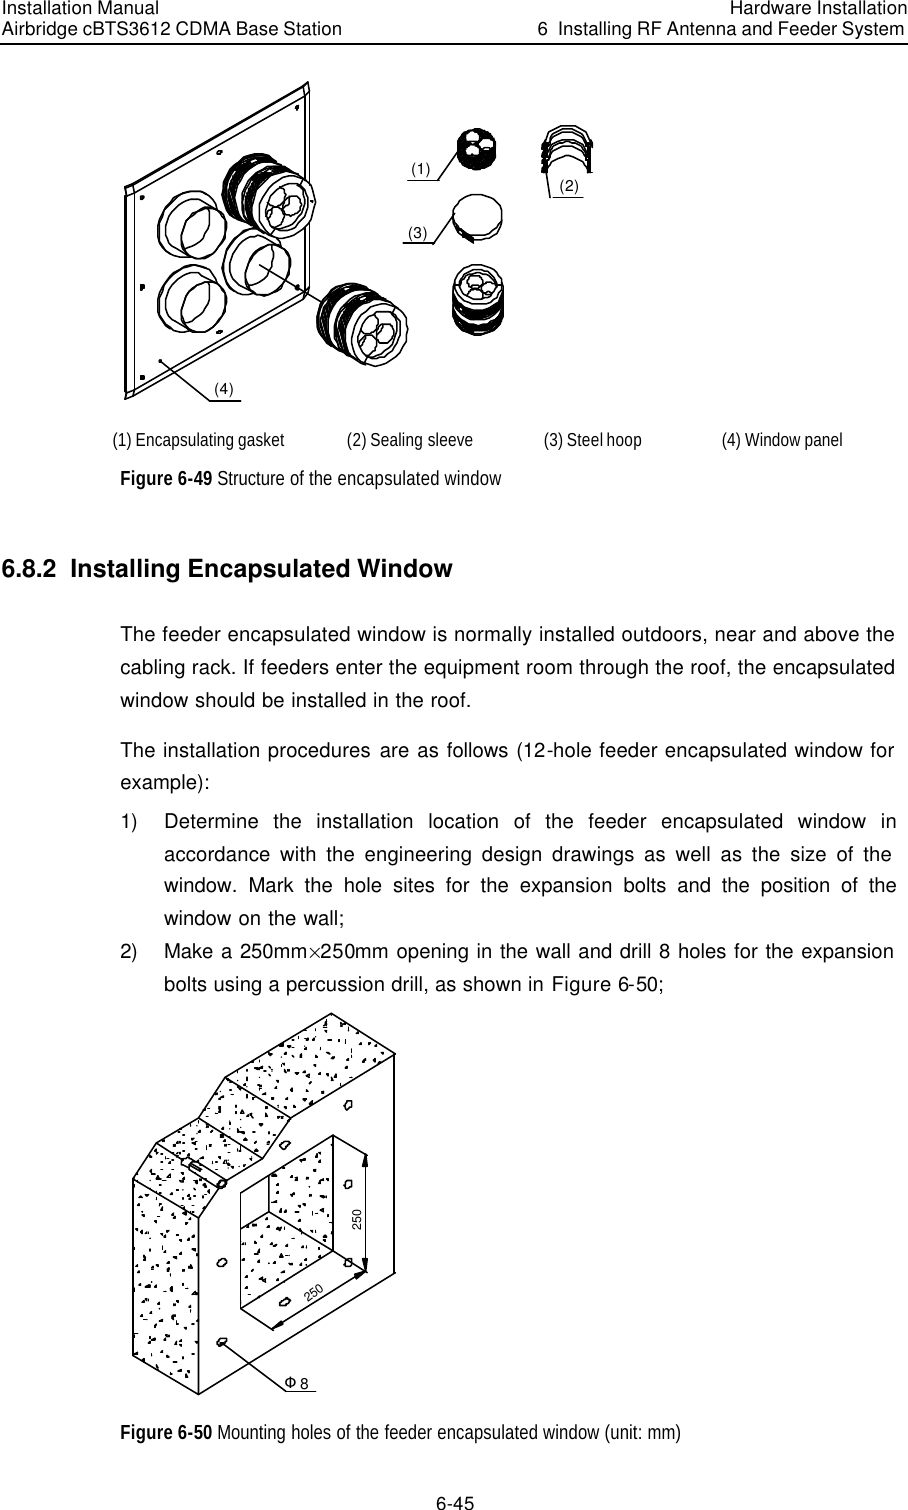 Installation Manual Airbridge cBTS3612 CDMA Base Station Hardware Installation6  Installing RF Antenna and Feeder System 6-45 (1)(4)(3)(2) (1) Encapsulating gasket (2) Sealing sleeve (3) Steel hoop (4) Window panel  Figure 6-49 Structure of the encapsulated window 6.8.2  Installing Encapsulated Window The feeder encapsulated window is normally installed outdoors, near and above the cabling rack. If feeders enter the equipment room through the roof, the encapsulated window should be installed in the roof.  The installation procedures are as follows (12-hole feeder encapsulated window for example): 1) Determine the installation location of the feeder encapsulated window in accordance with the engineering design drawings as well as the size of the window. Mark the hole sites for the expansion bolts and the position of the window on the wall; 2) Make a 250mm%250mm opening in the wall and drill 8 holes for the expansion bolts using a percussion drill, as shown in Figure 6-50; 250250Φ8 Figure 6-50 Mounting holes of the feeder encapsulated window (unit: mm) 